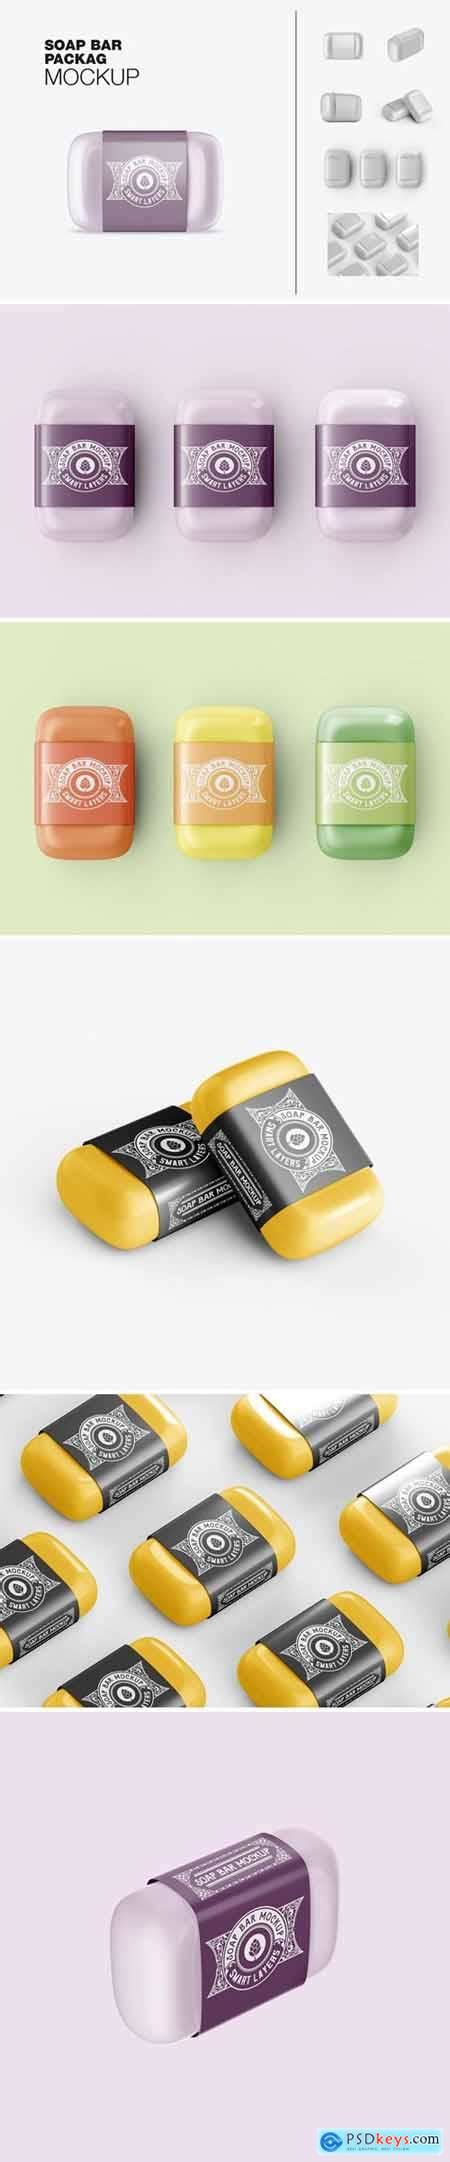 Soap Bar Package Mockup Free Download Photoshop Vector Stock Image